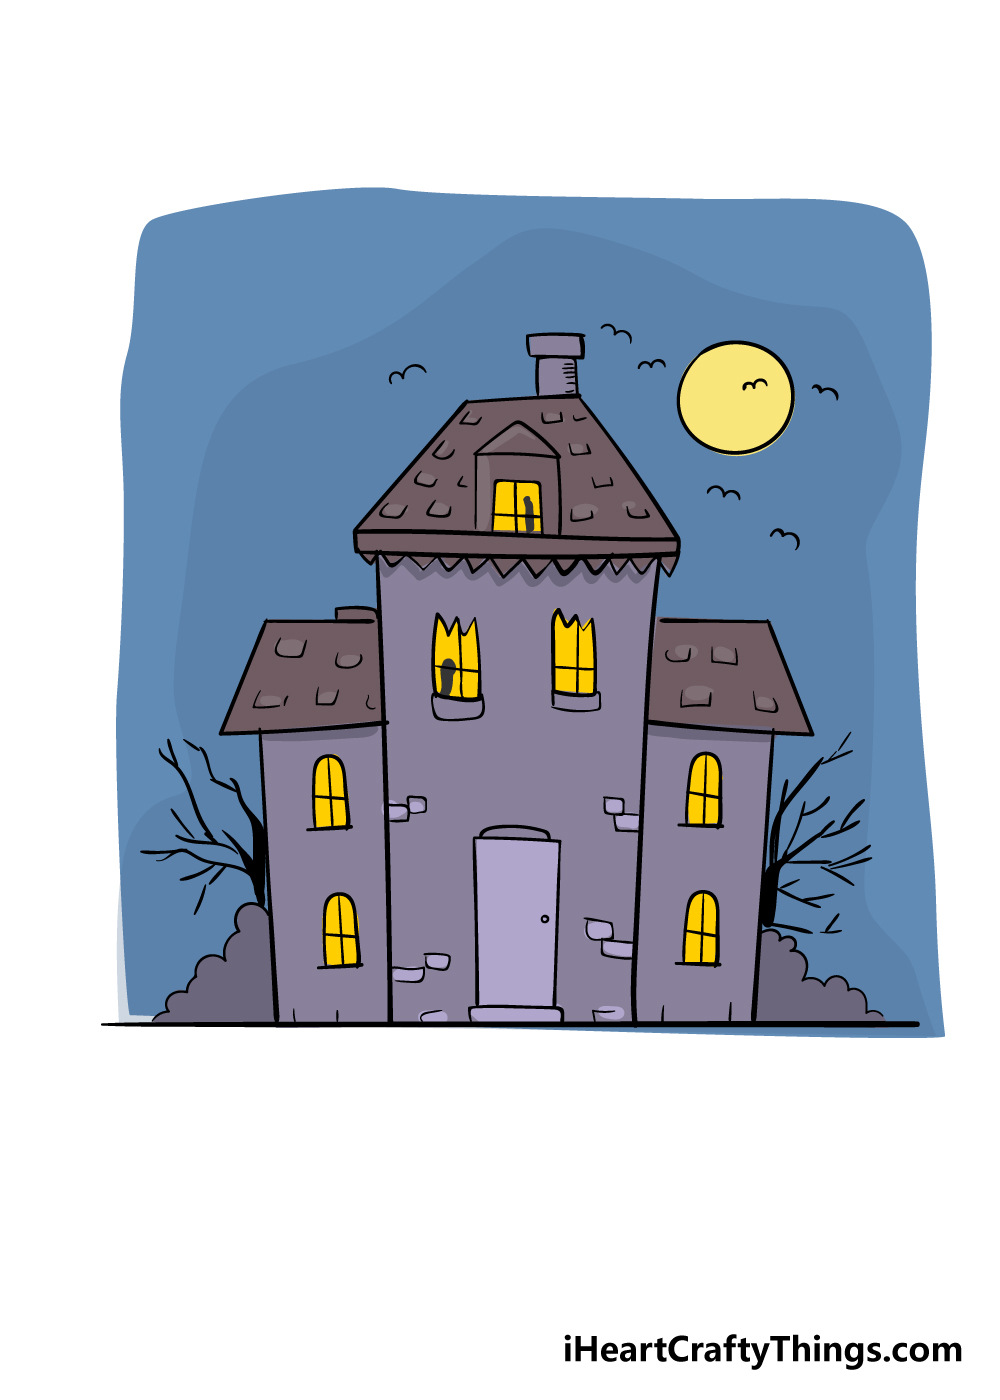 3 Ways to Draw a Simple House - wikiHow